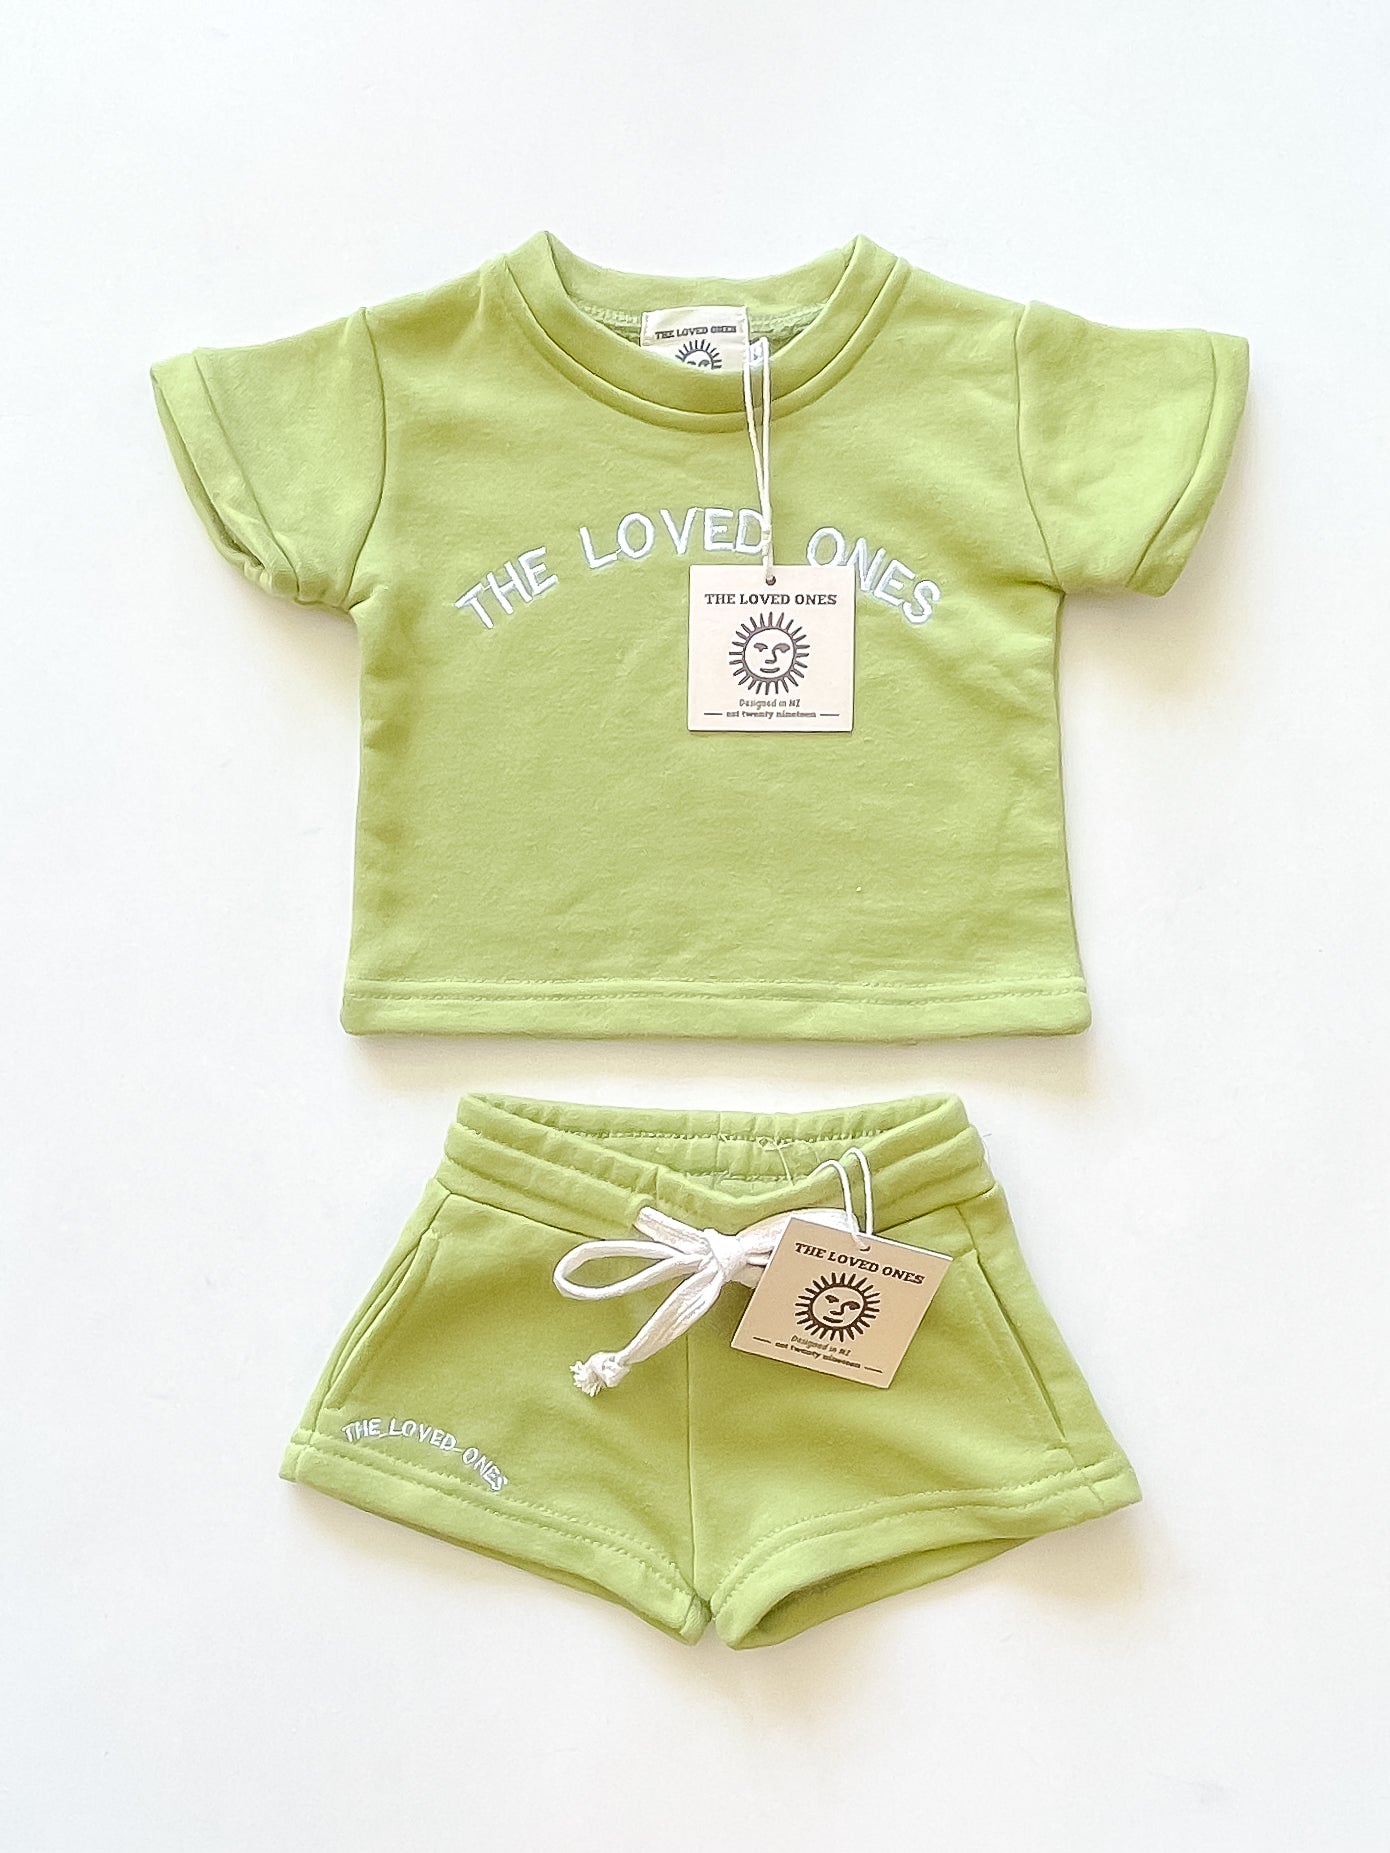 BNWT The Loved Ones occy jersey set (3-6m)